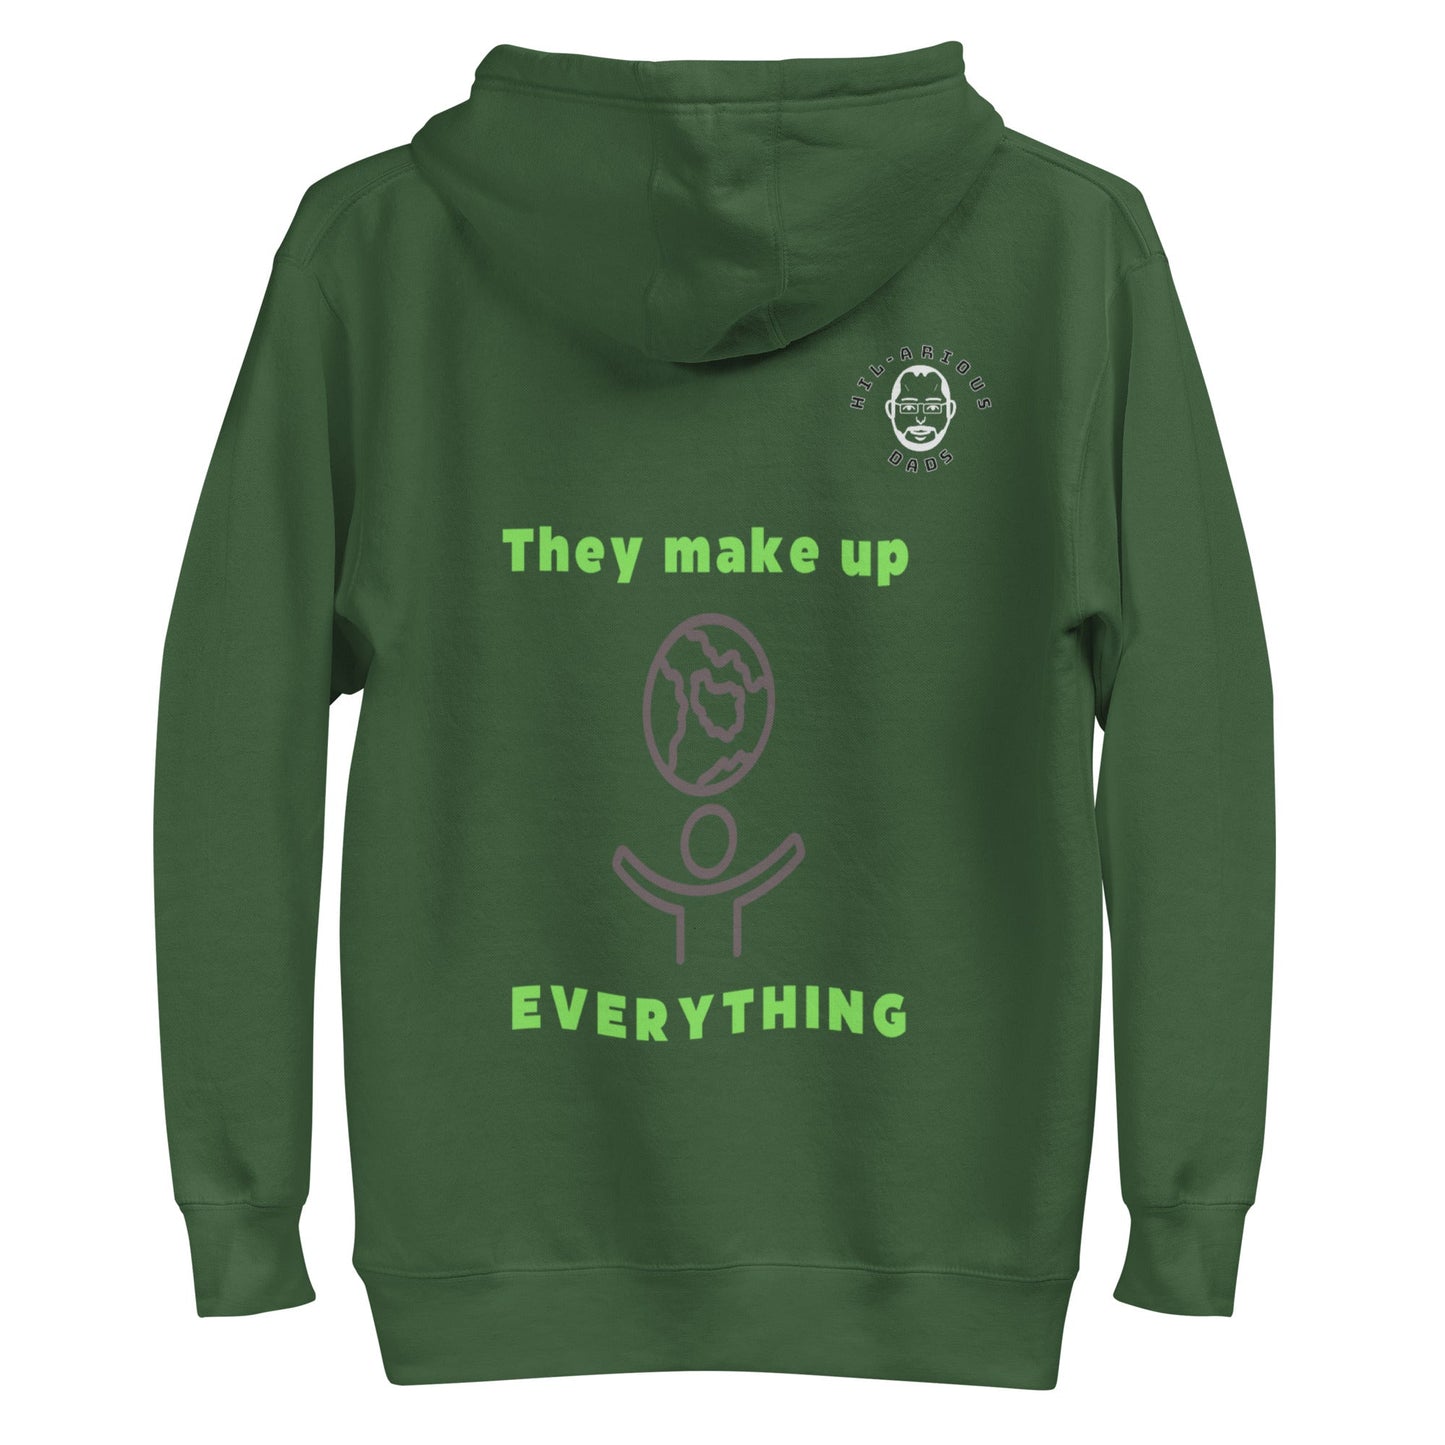 Don't trust atoms-Hoodie - Hil-arious Dads